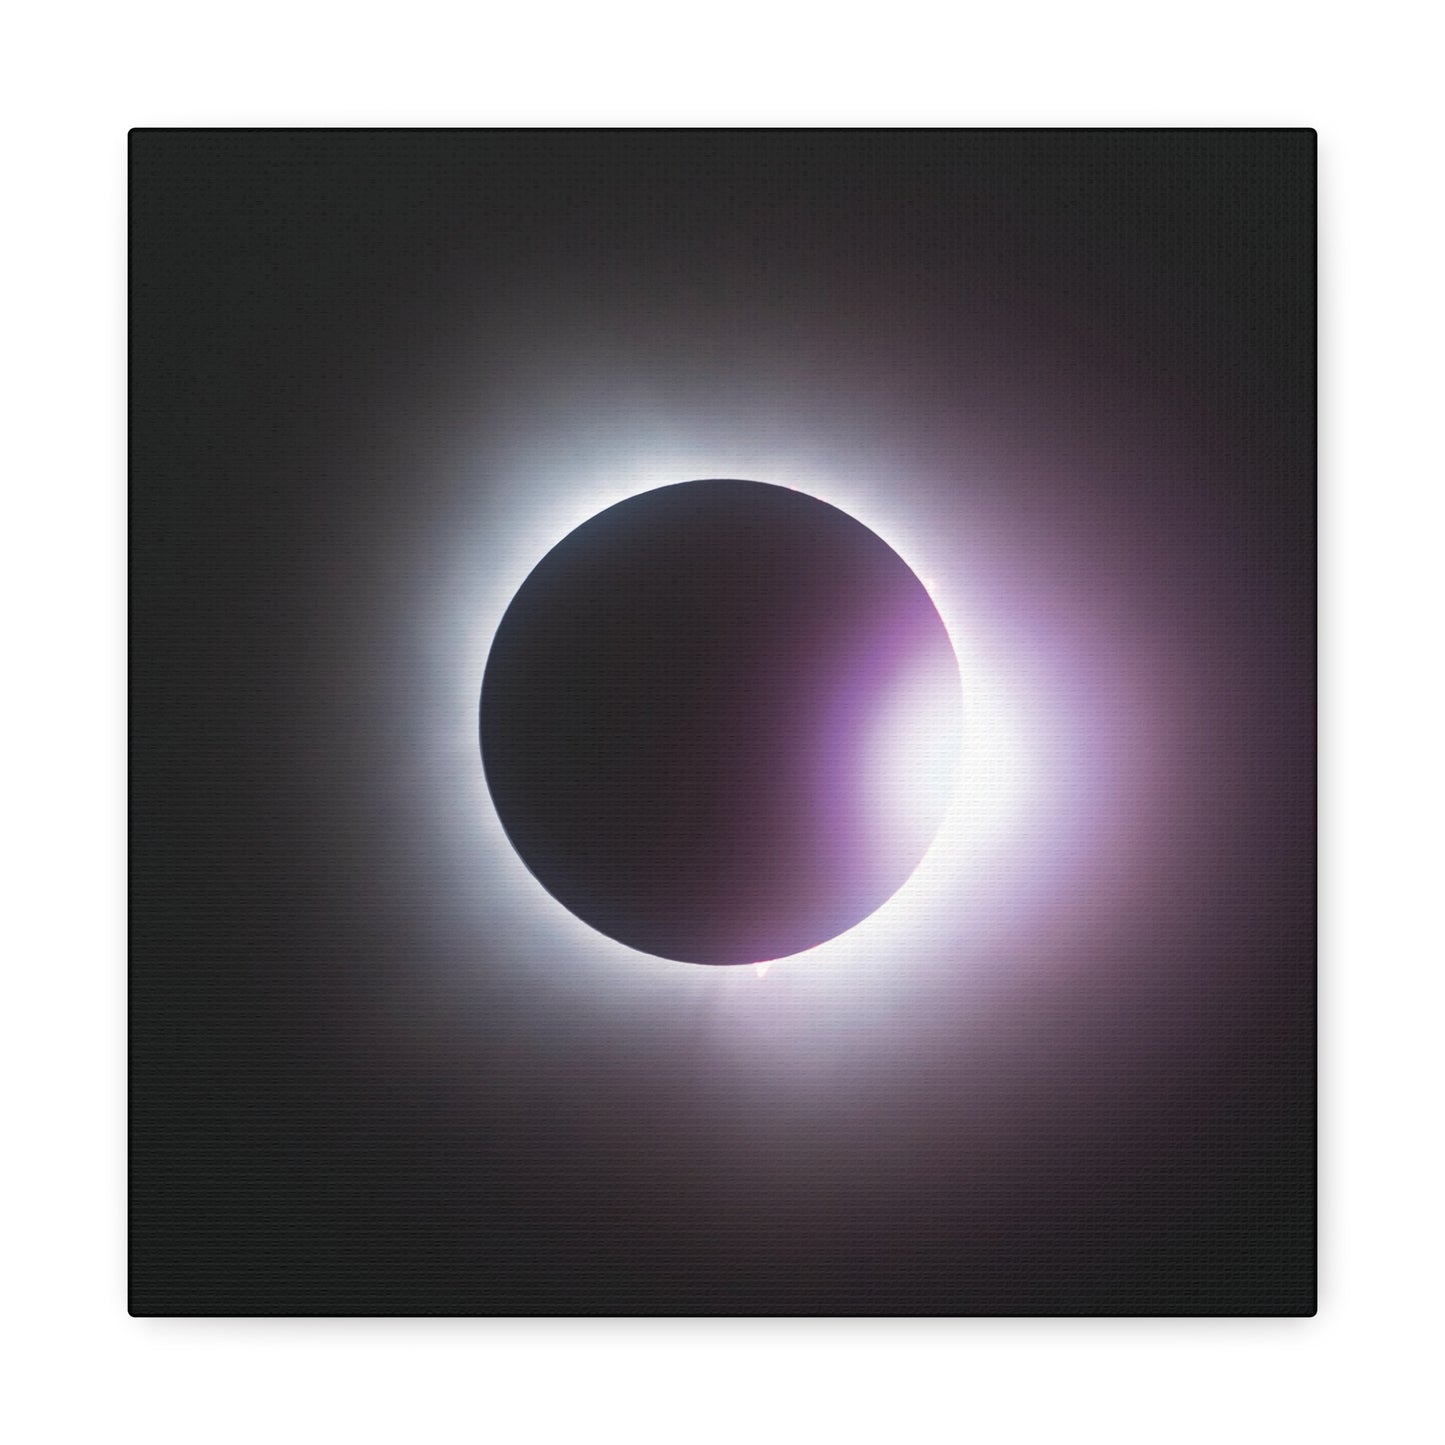 Ring of the Eclipse on Canvas